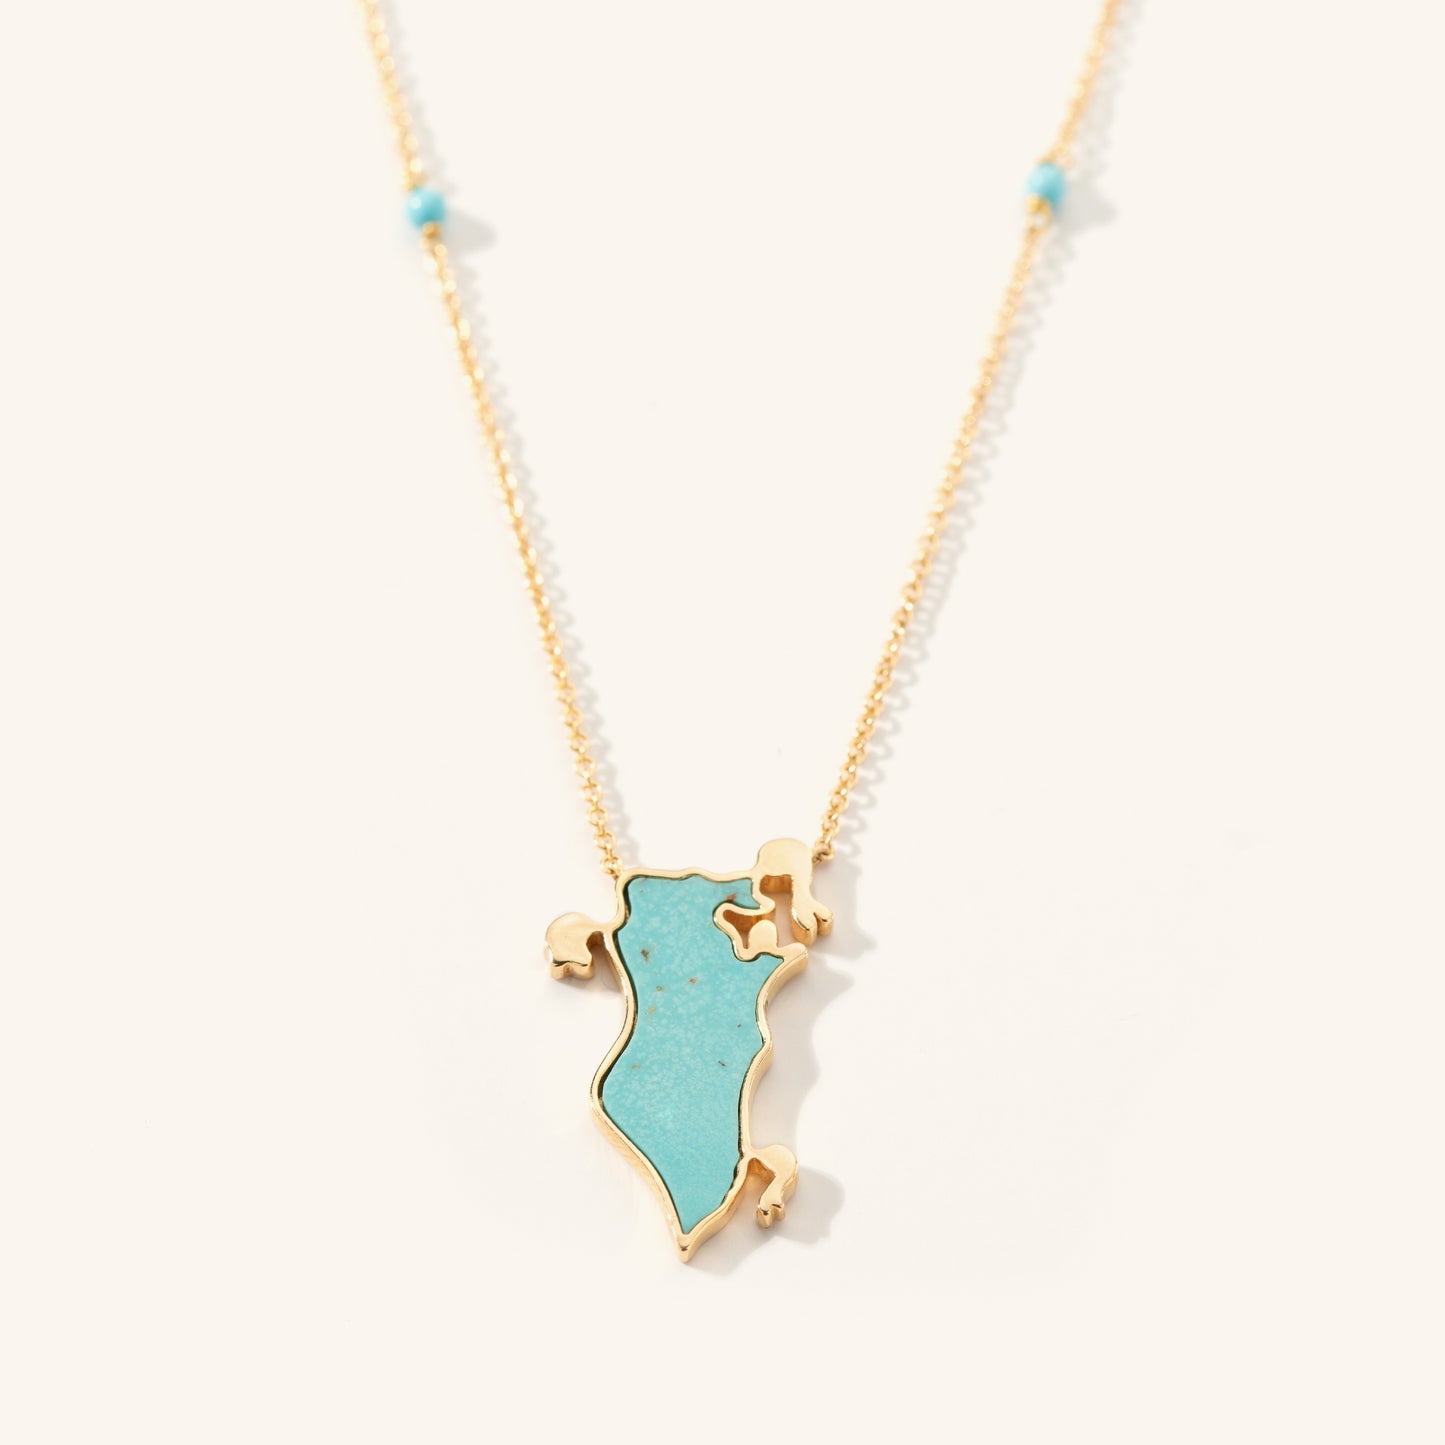 Bahrain Collection - Turquoise Necklace